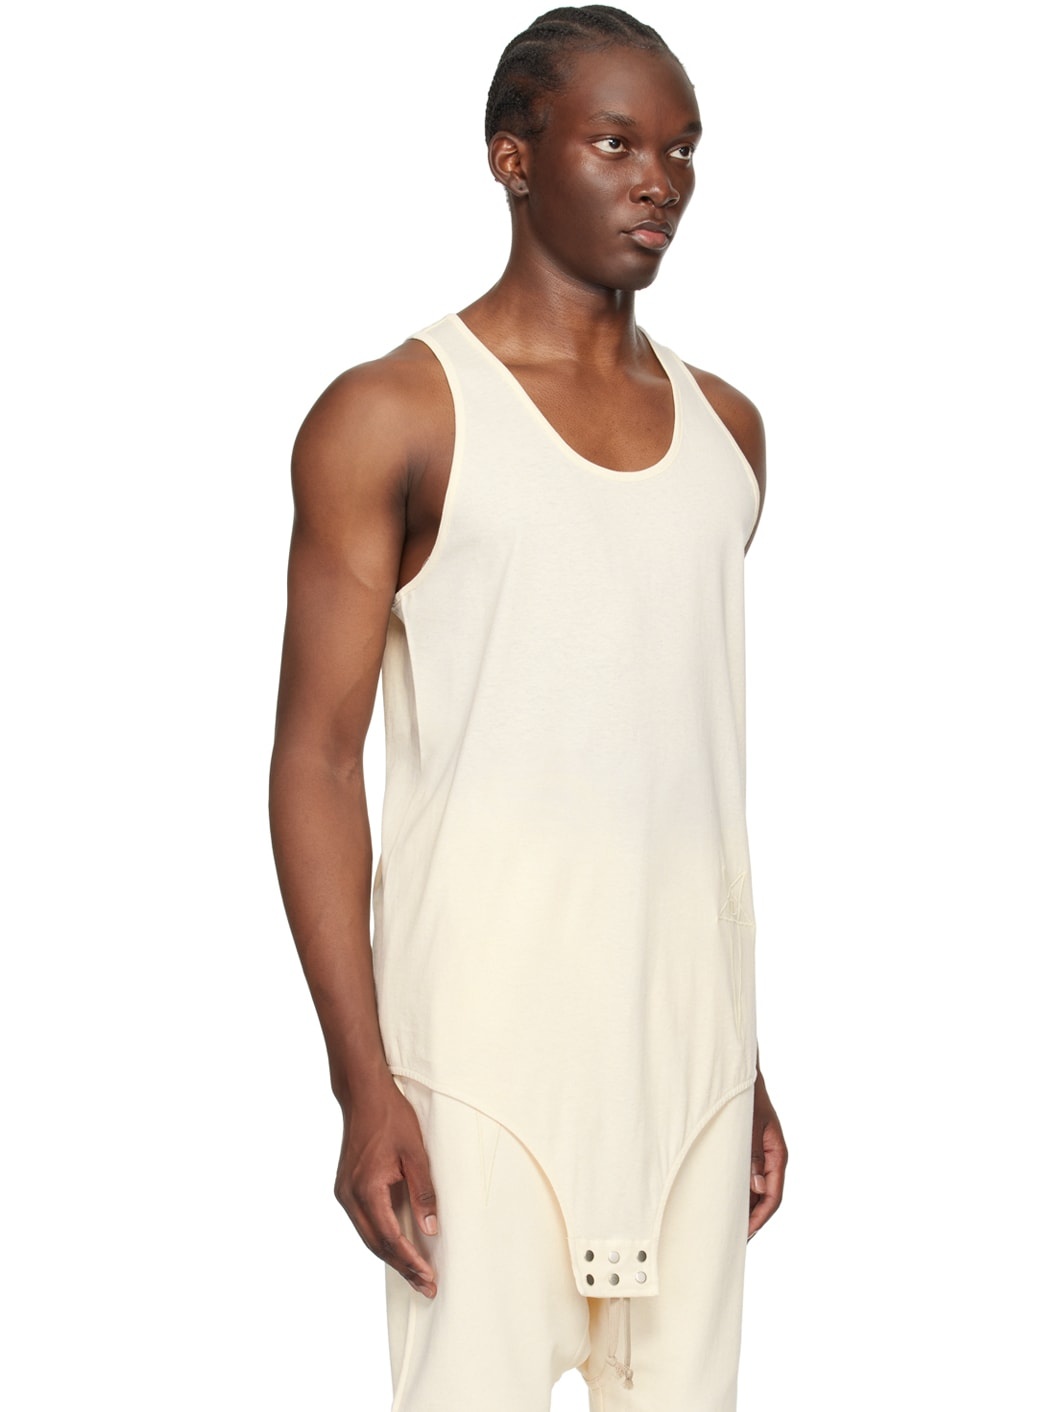 Off-White Champion Edition Basketball Tank Top - 2